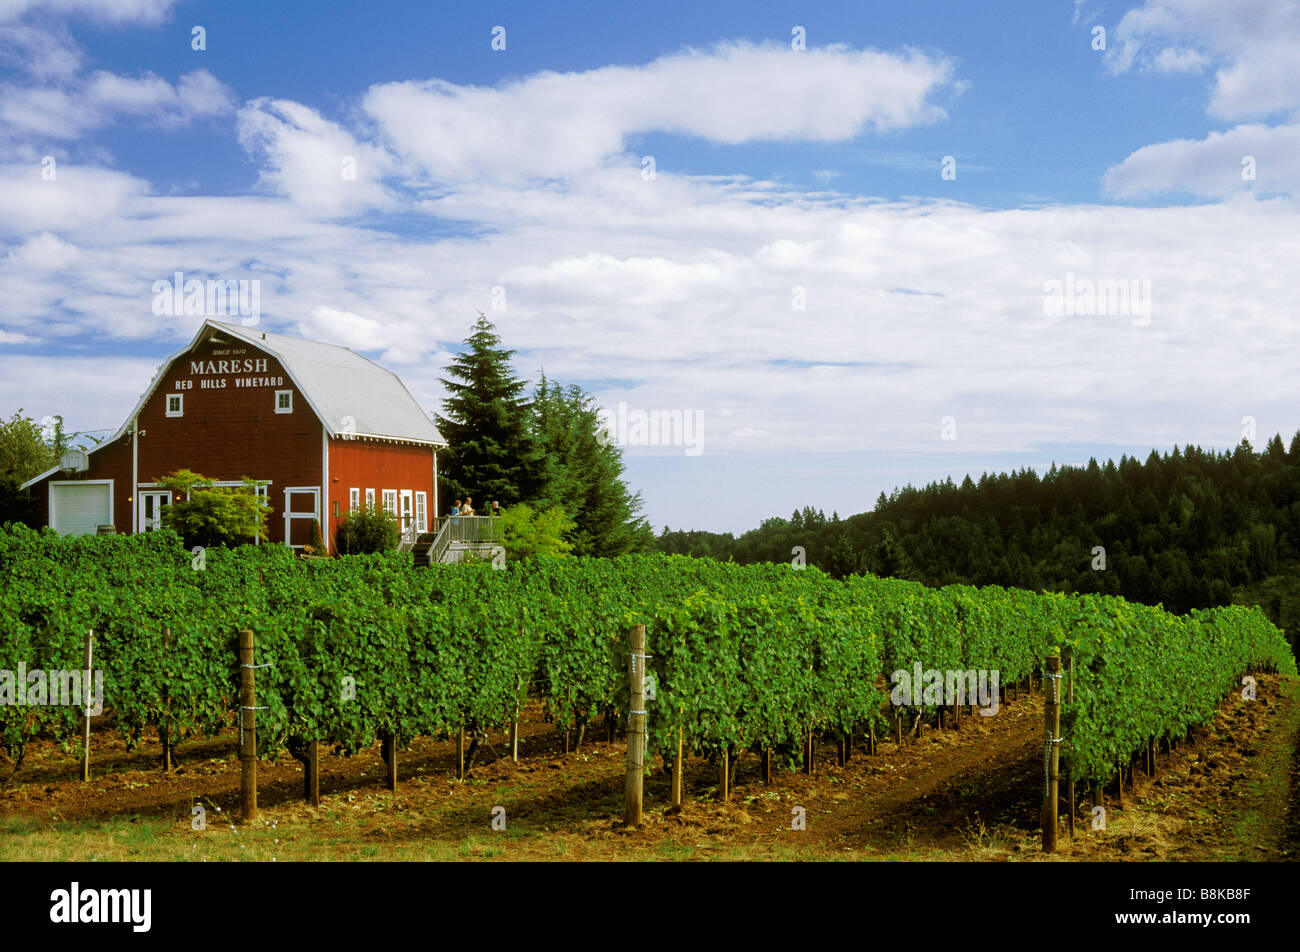 Maresh Red Hills Vineyard Dundee Hills Yamhill County Willamette Valley Oregon Stock Photo